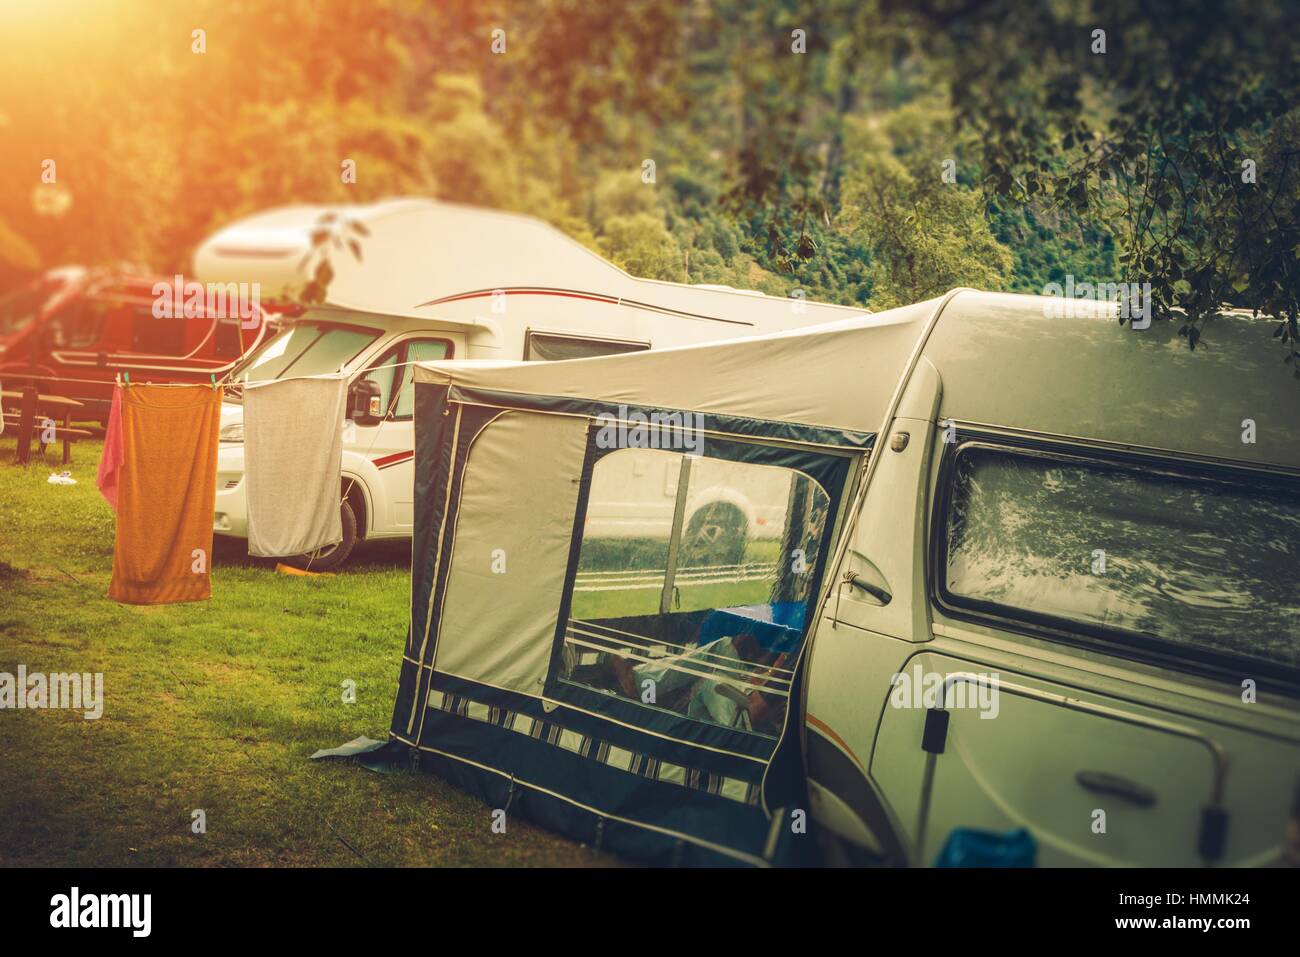 Summer RV Camper Camping. Relaxing on the Campground. Stock Photo